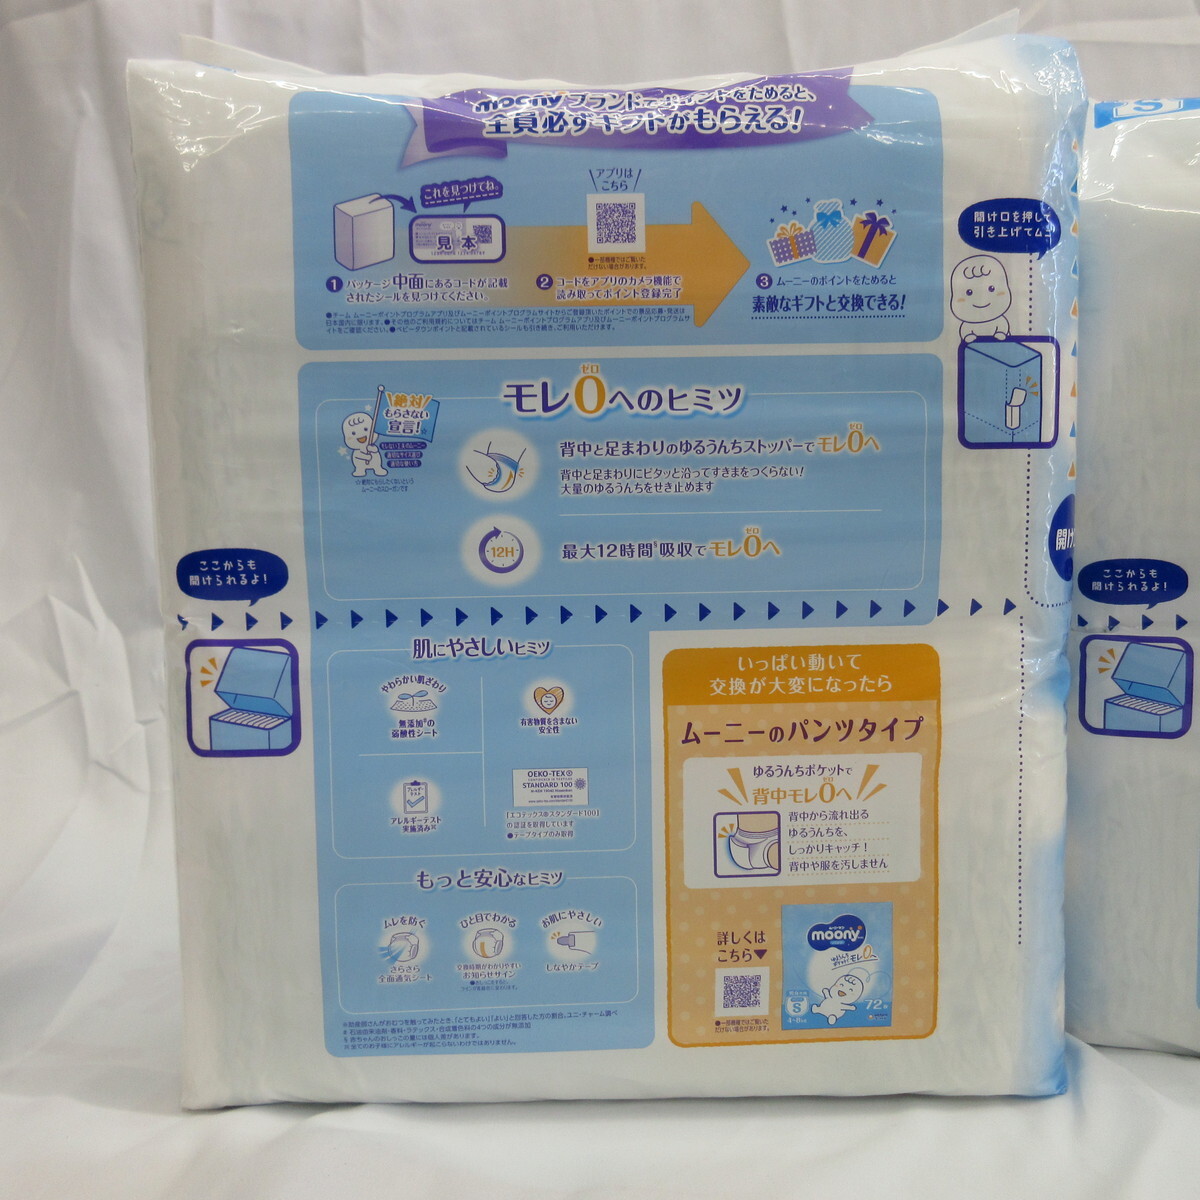 m- knee Homme tsu tape S size 80 sheets entering 2 pack moony 4~8kg baby supplies child rearing set sale set sale post-natal 2~7. month 0 -years old 